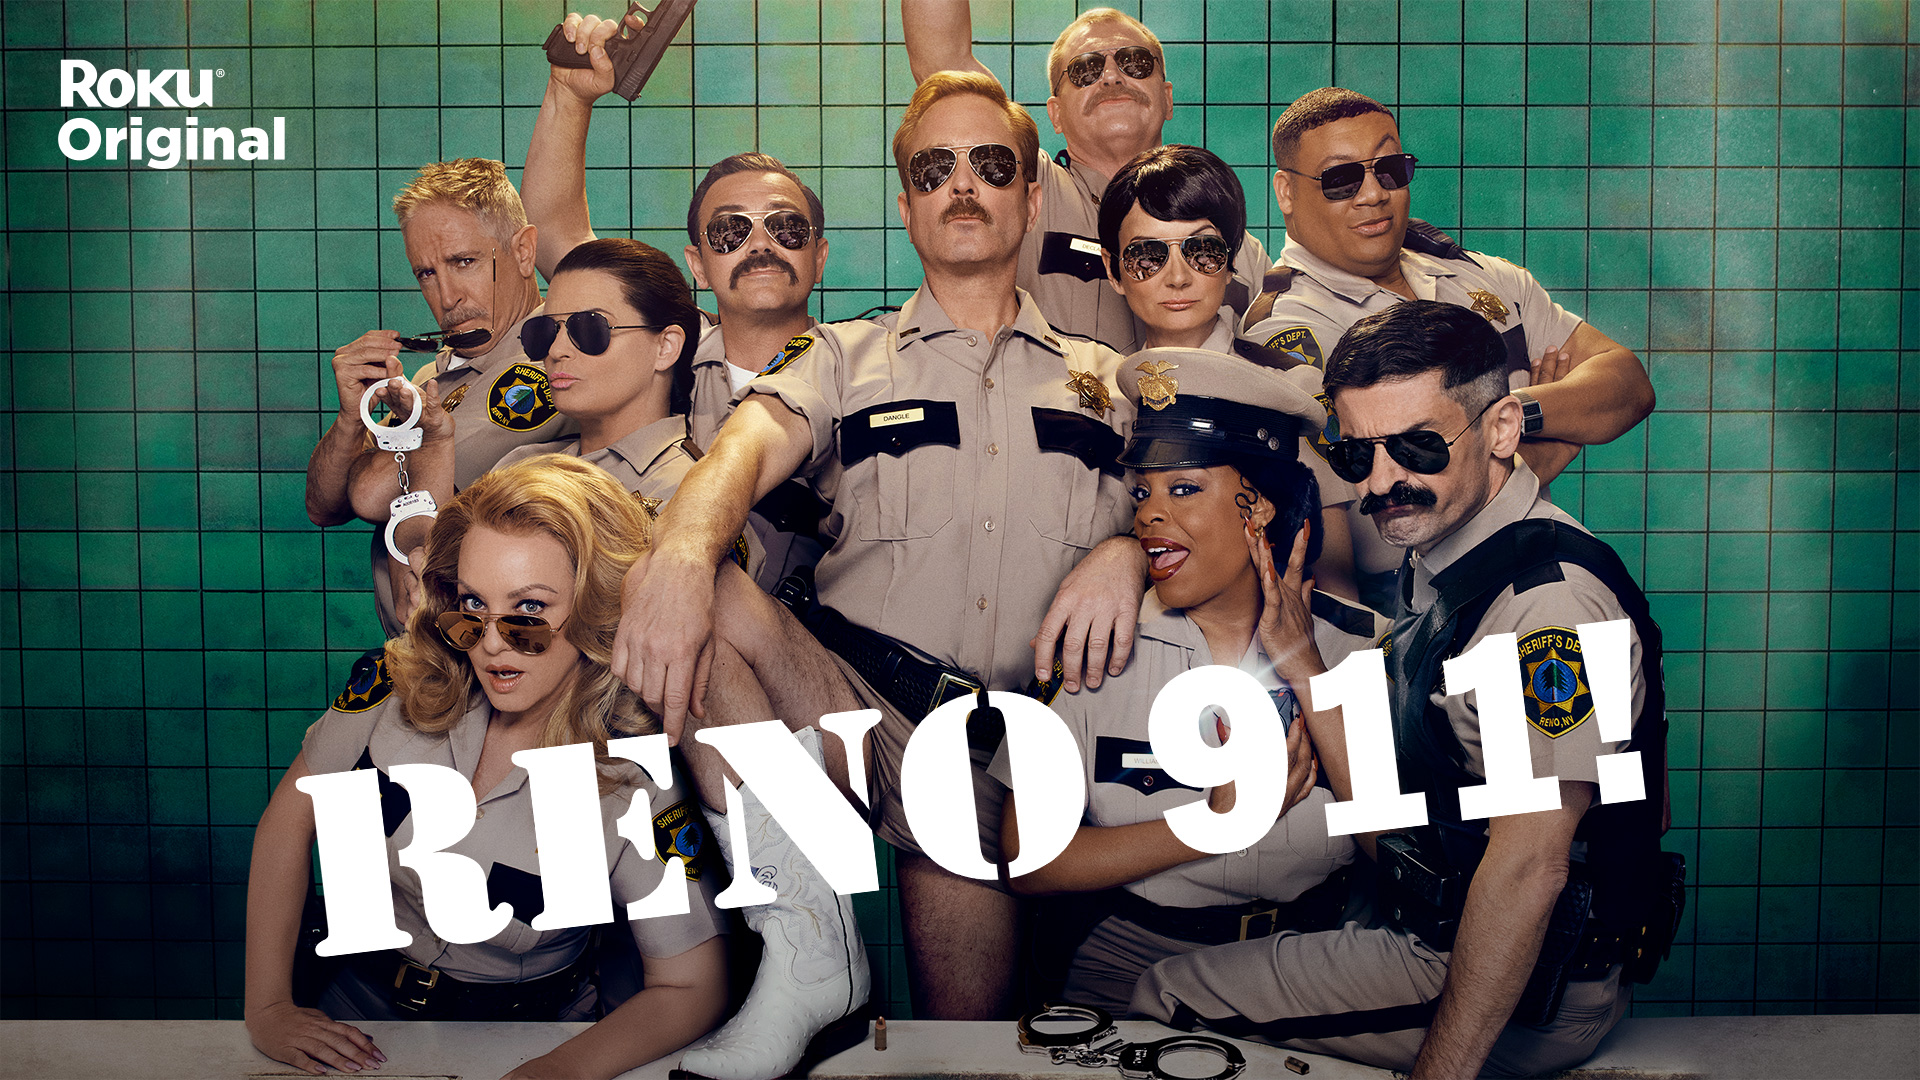 Watch RENO 911! Streaming Online - Try for Free